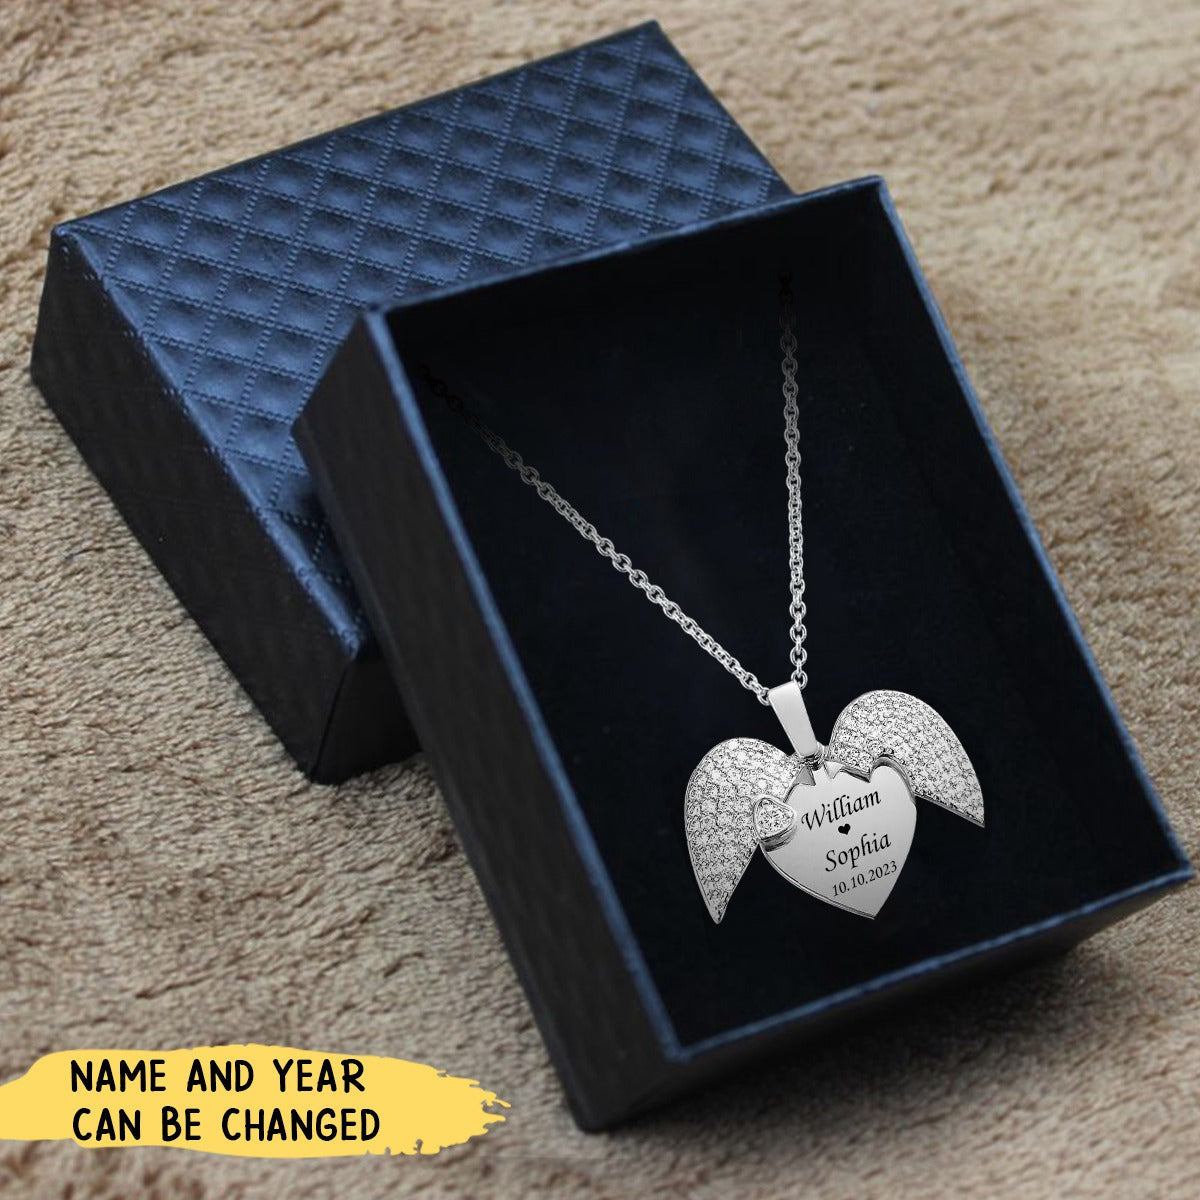 Engraved Heart Necklace Personalized Gift